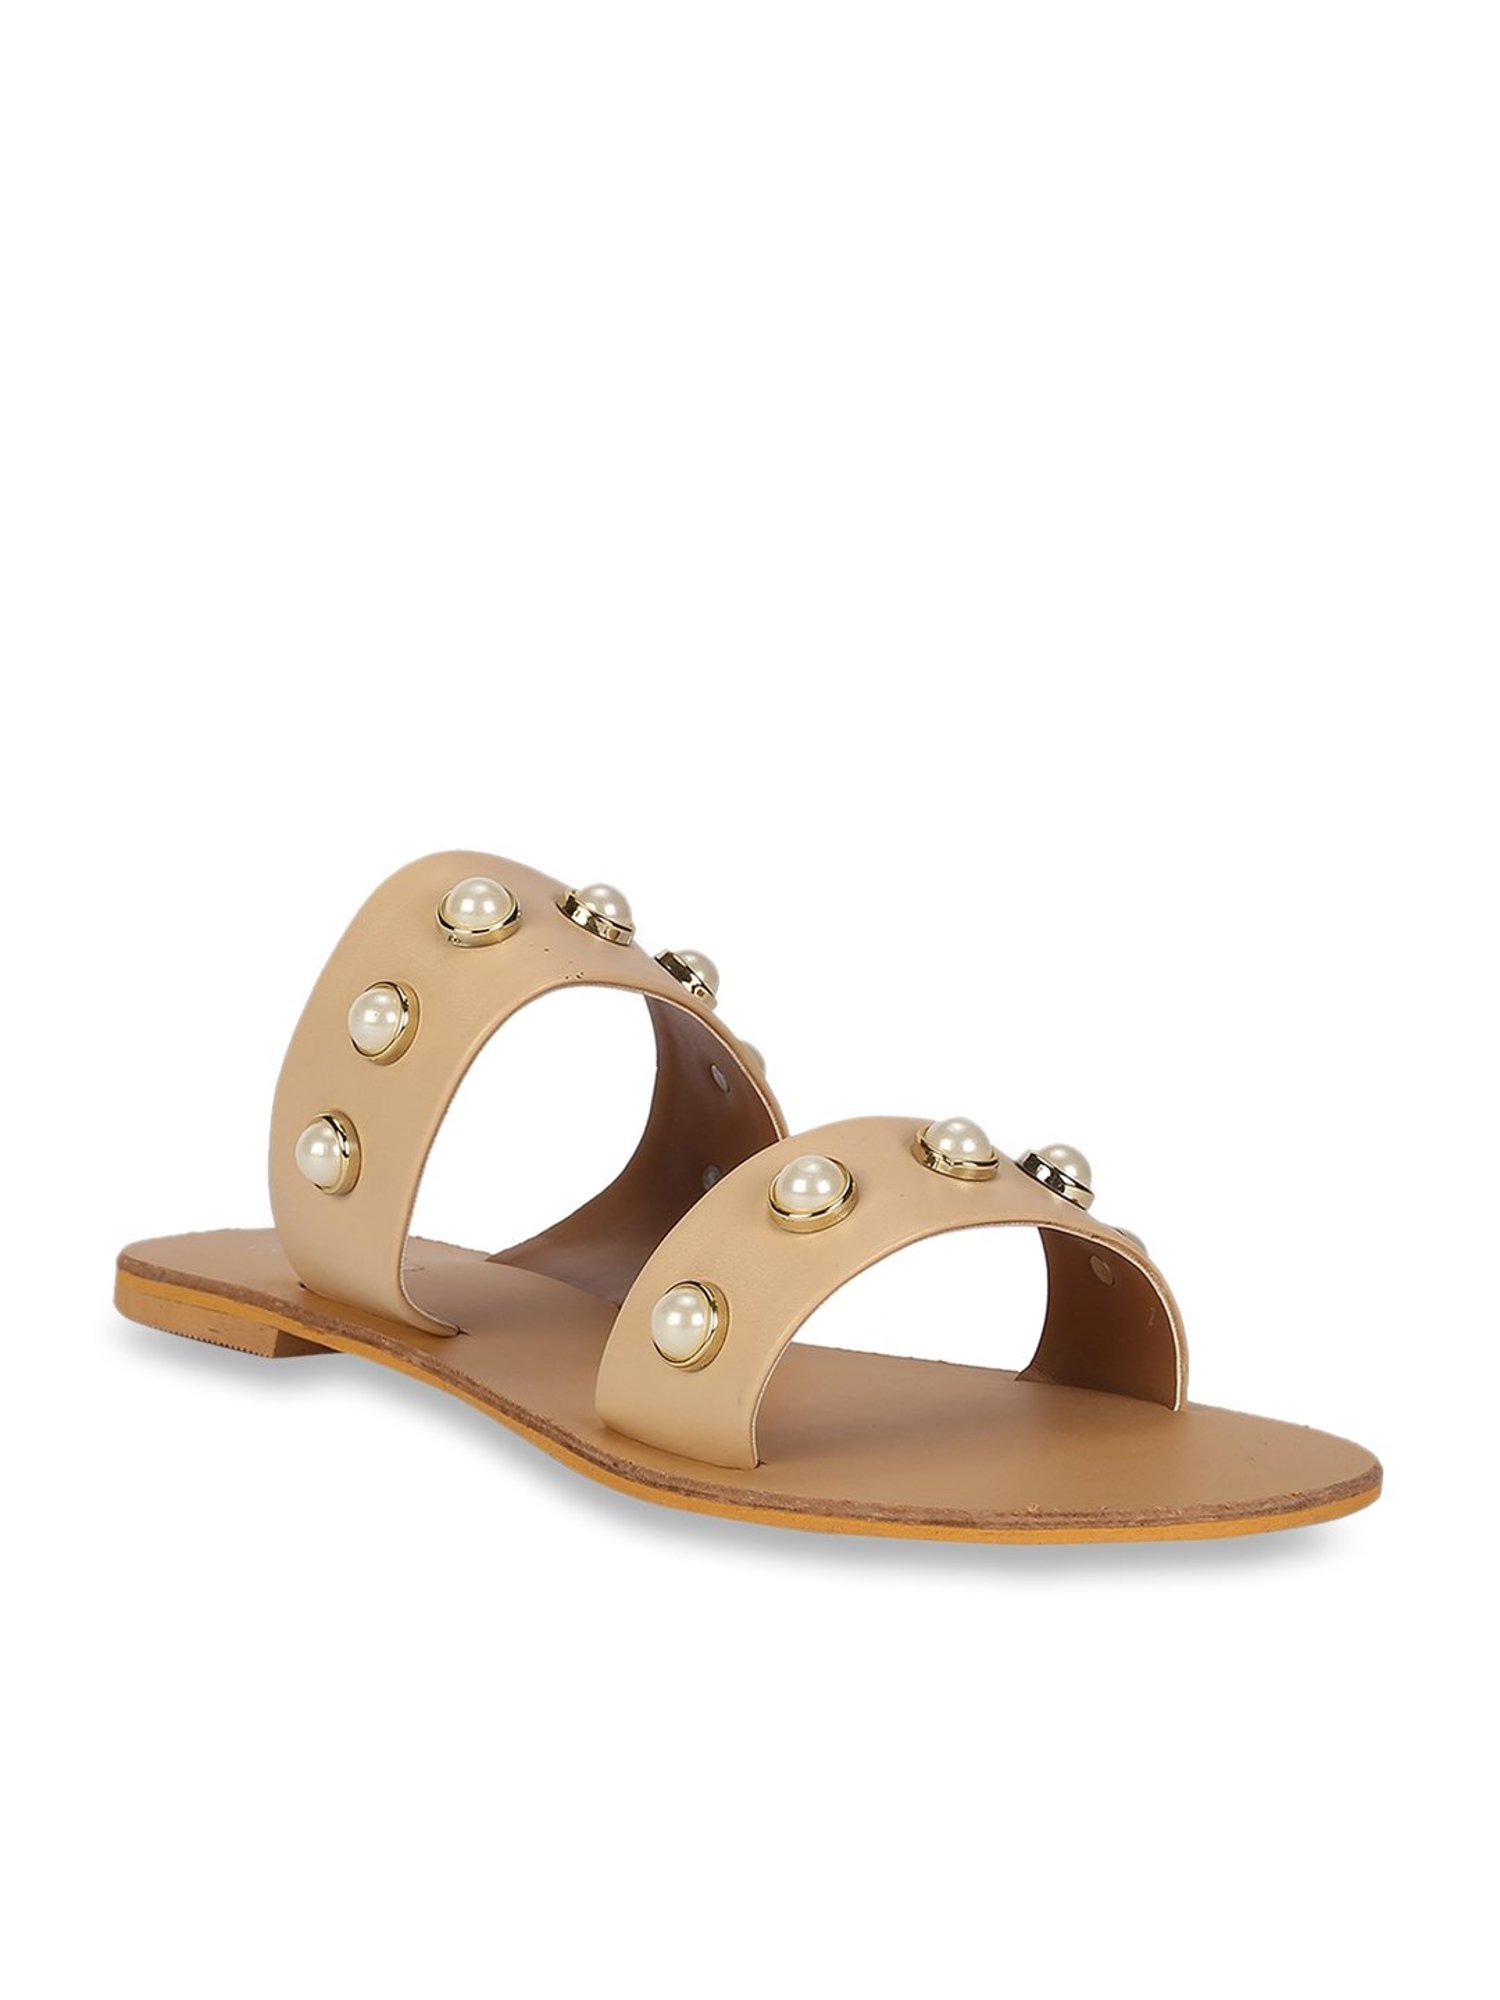 Buy People Beige Casual Sandals for 